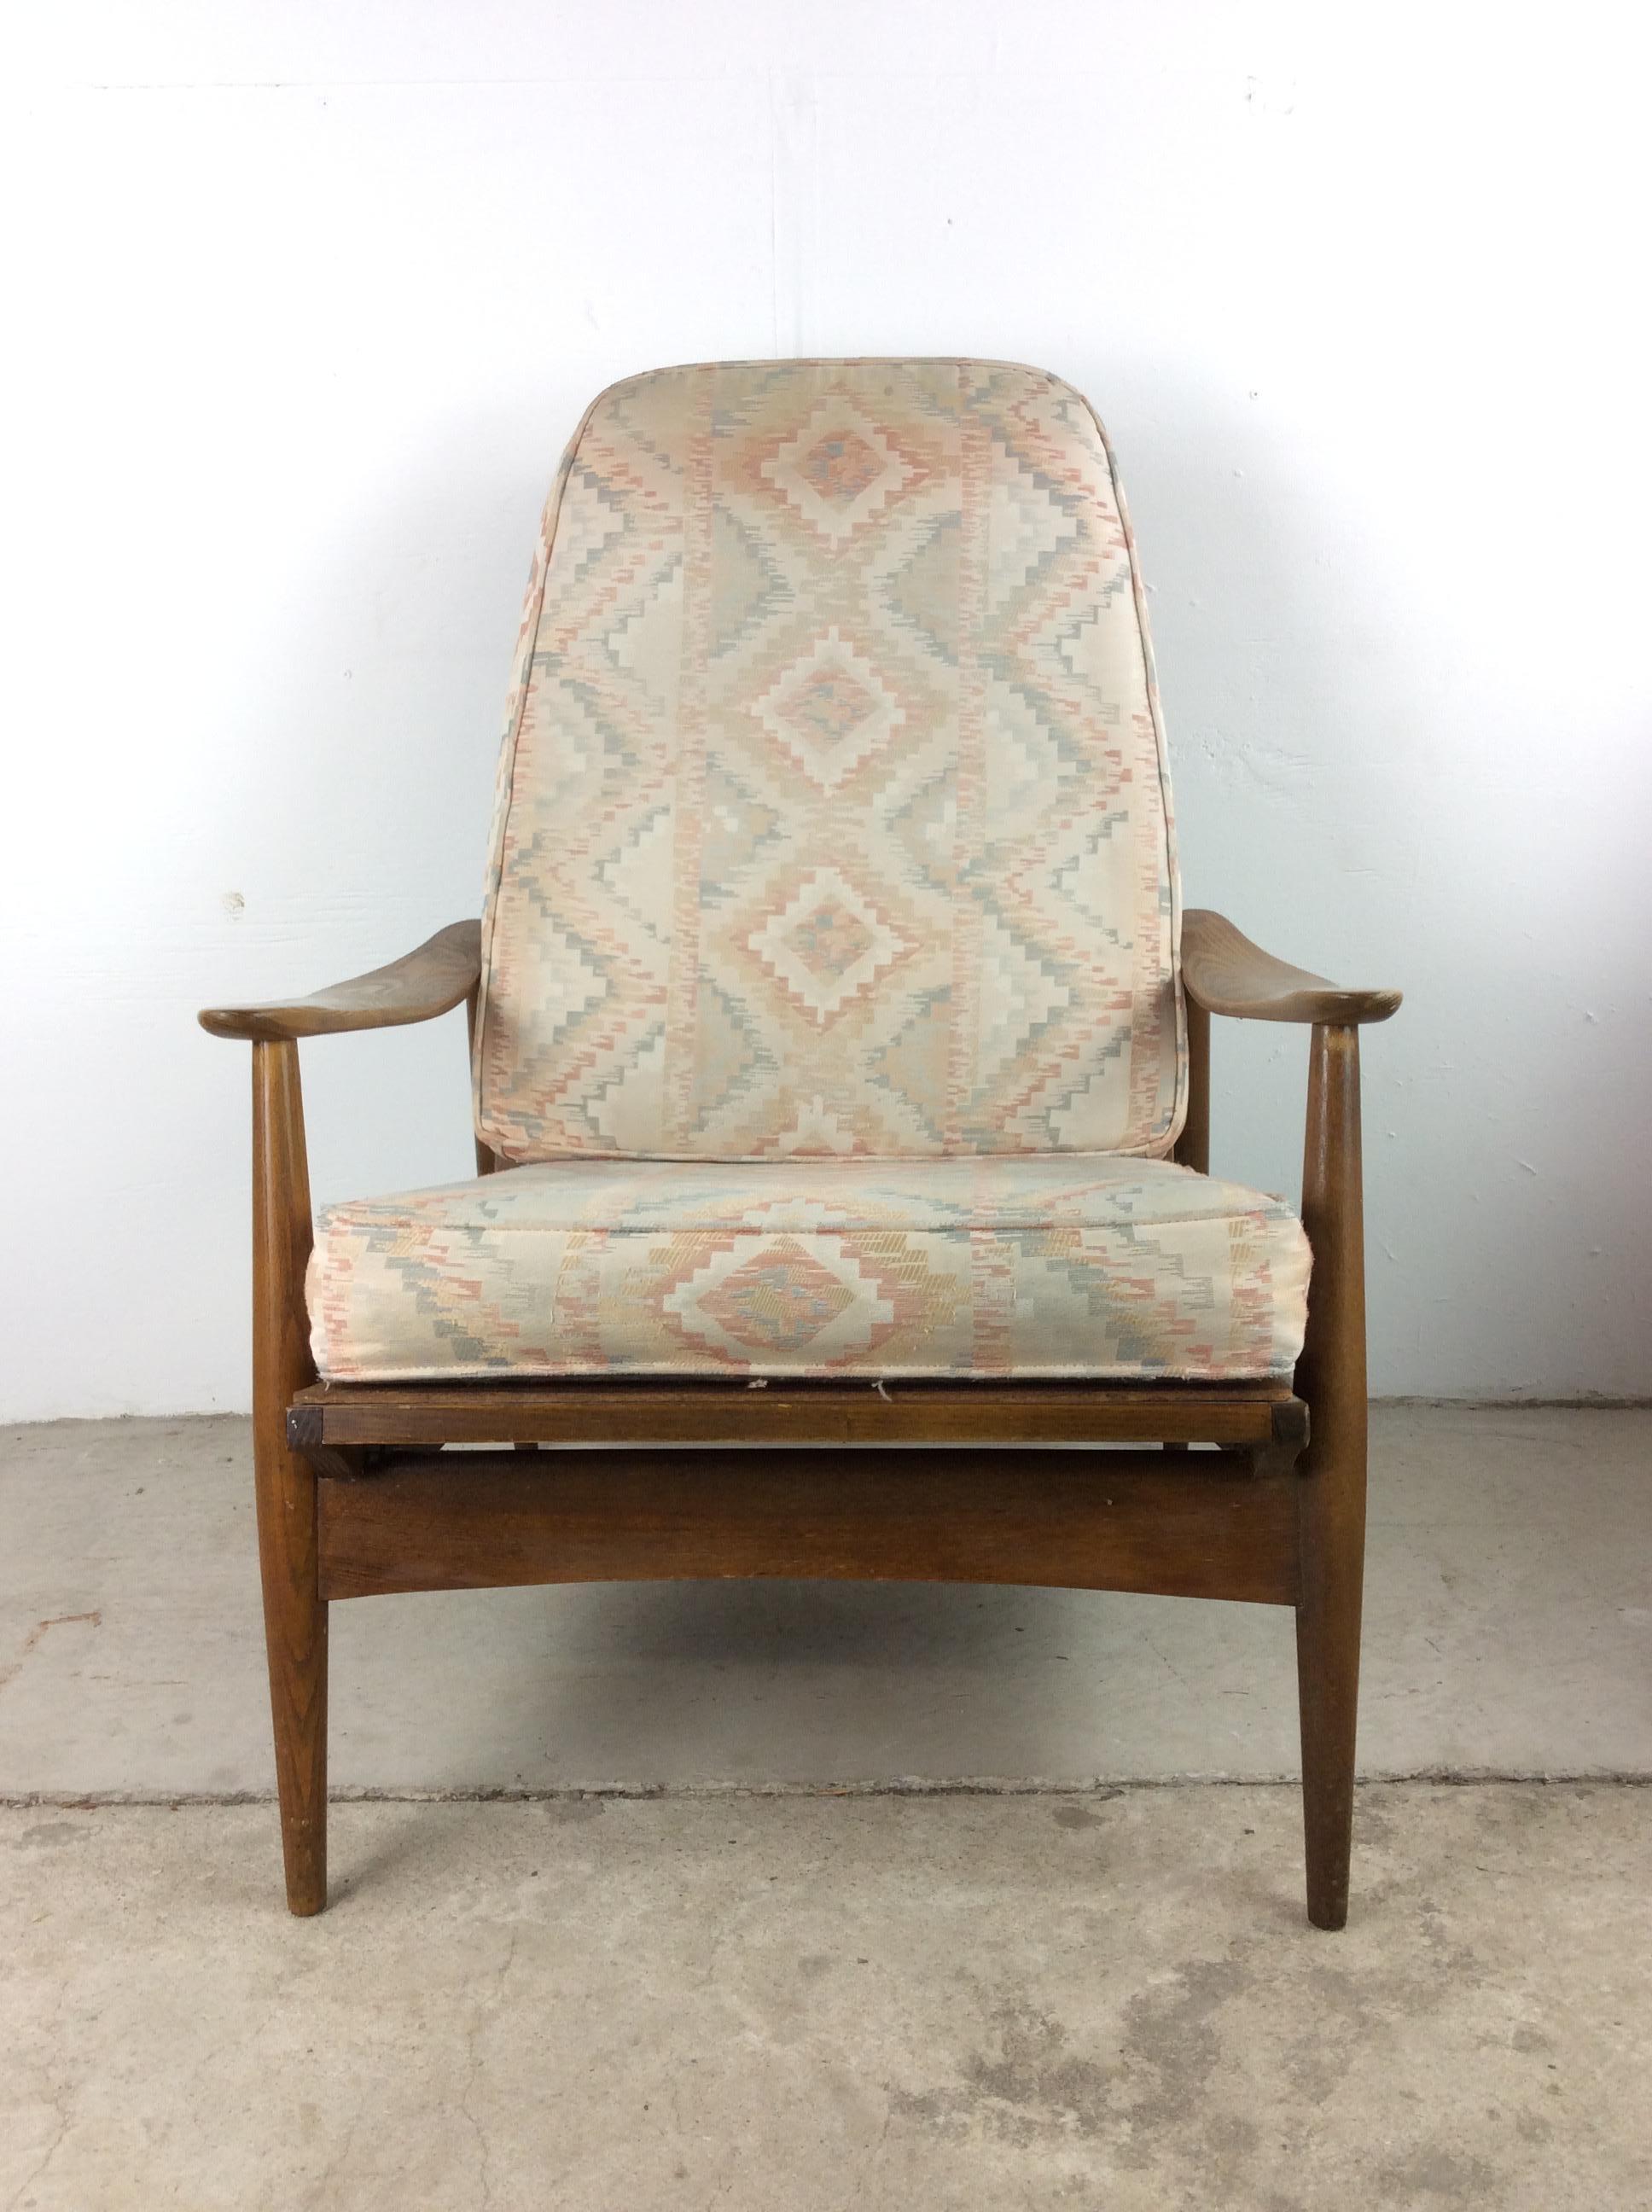 This set of mid century modern chairs feature solid wood construction, original walnut finish, removable cushions with vintage upholstery and tapered legs.

Chair dimensions: 30w 32d 37.5h 21ah 17sh
Ottoman dimensions: 23w 17d 14h

